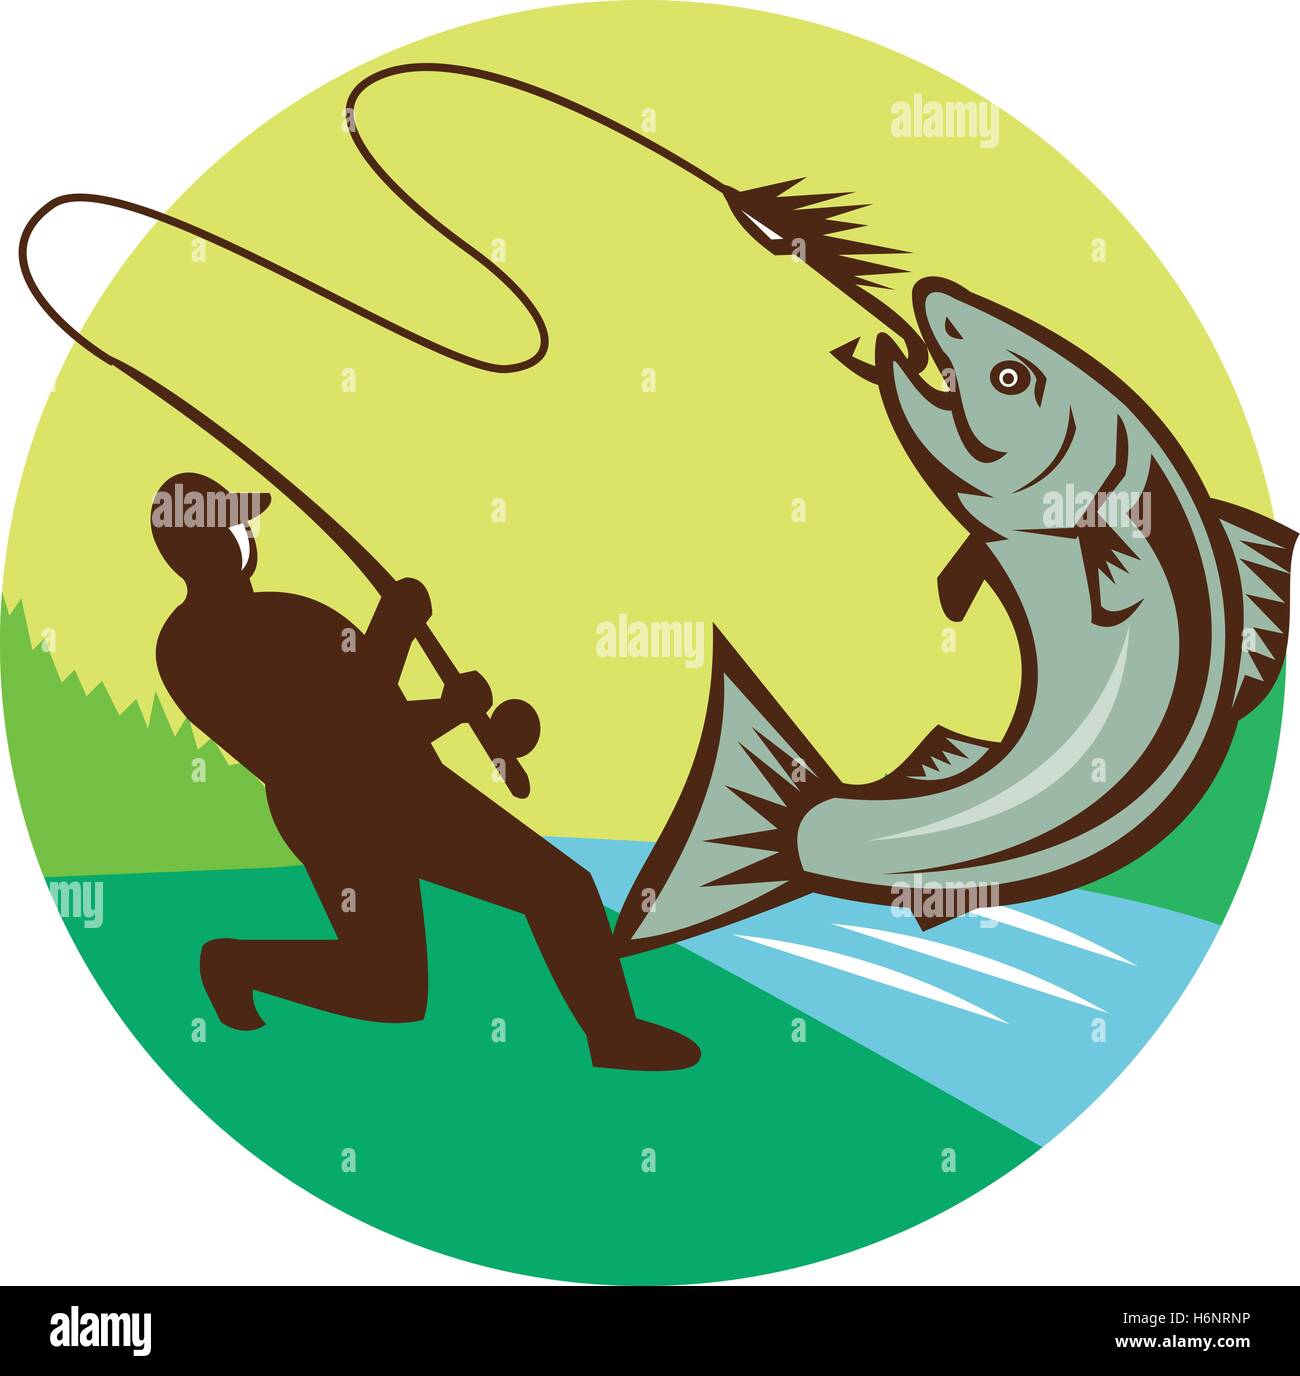 Illustration of a fly fisherman fishing casting rod and reel